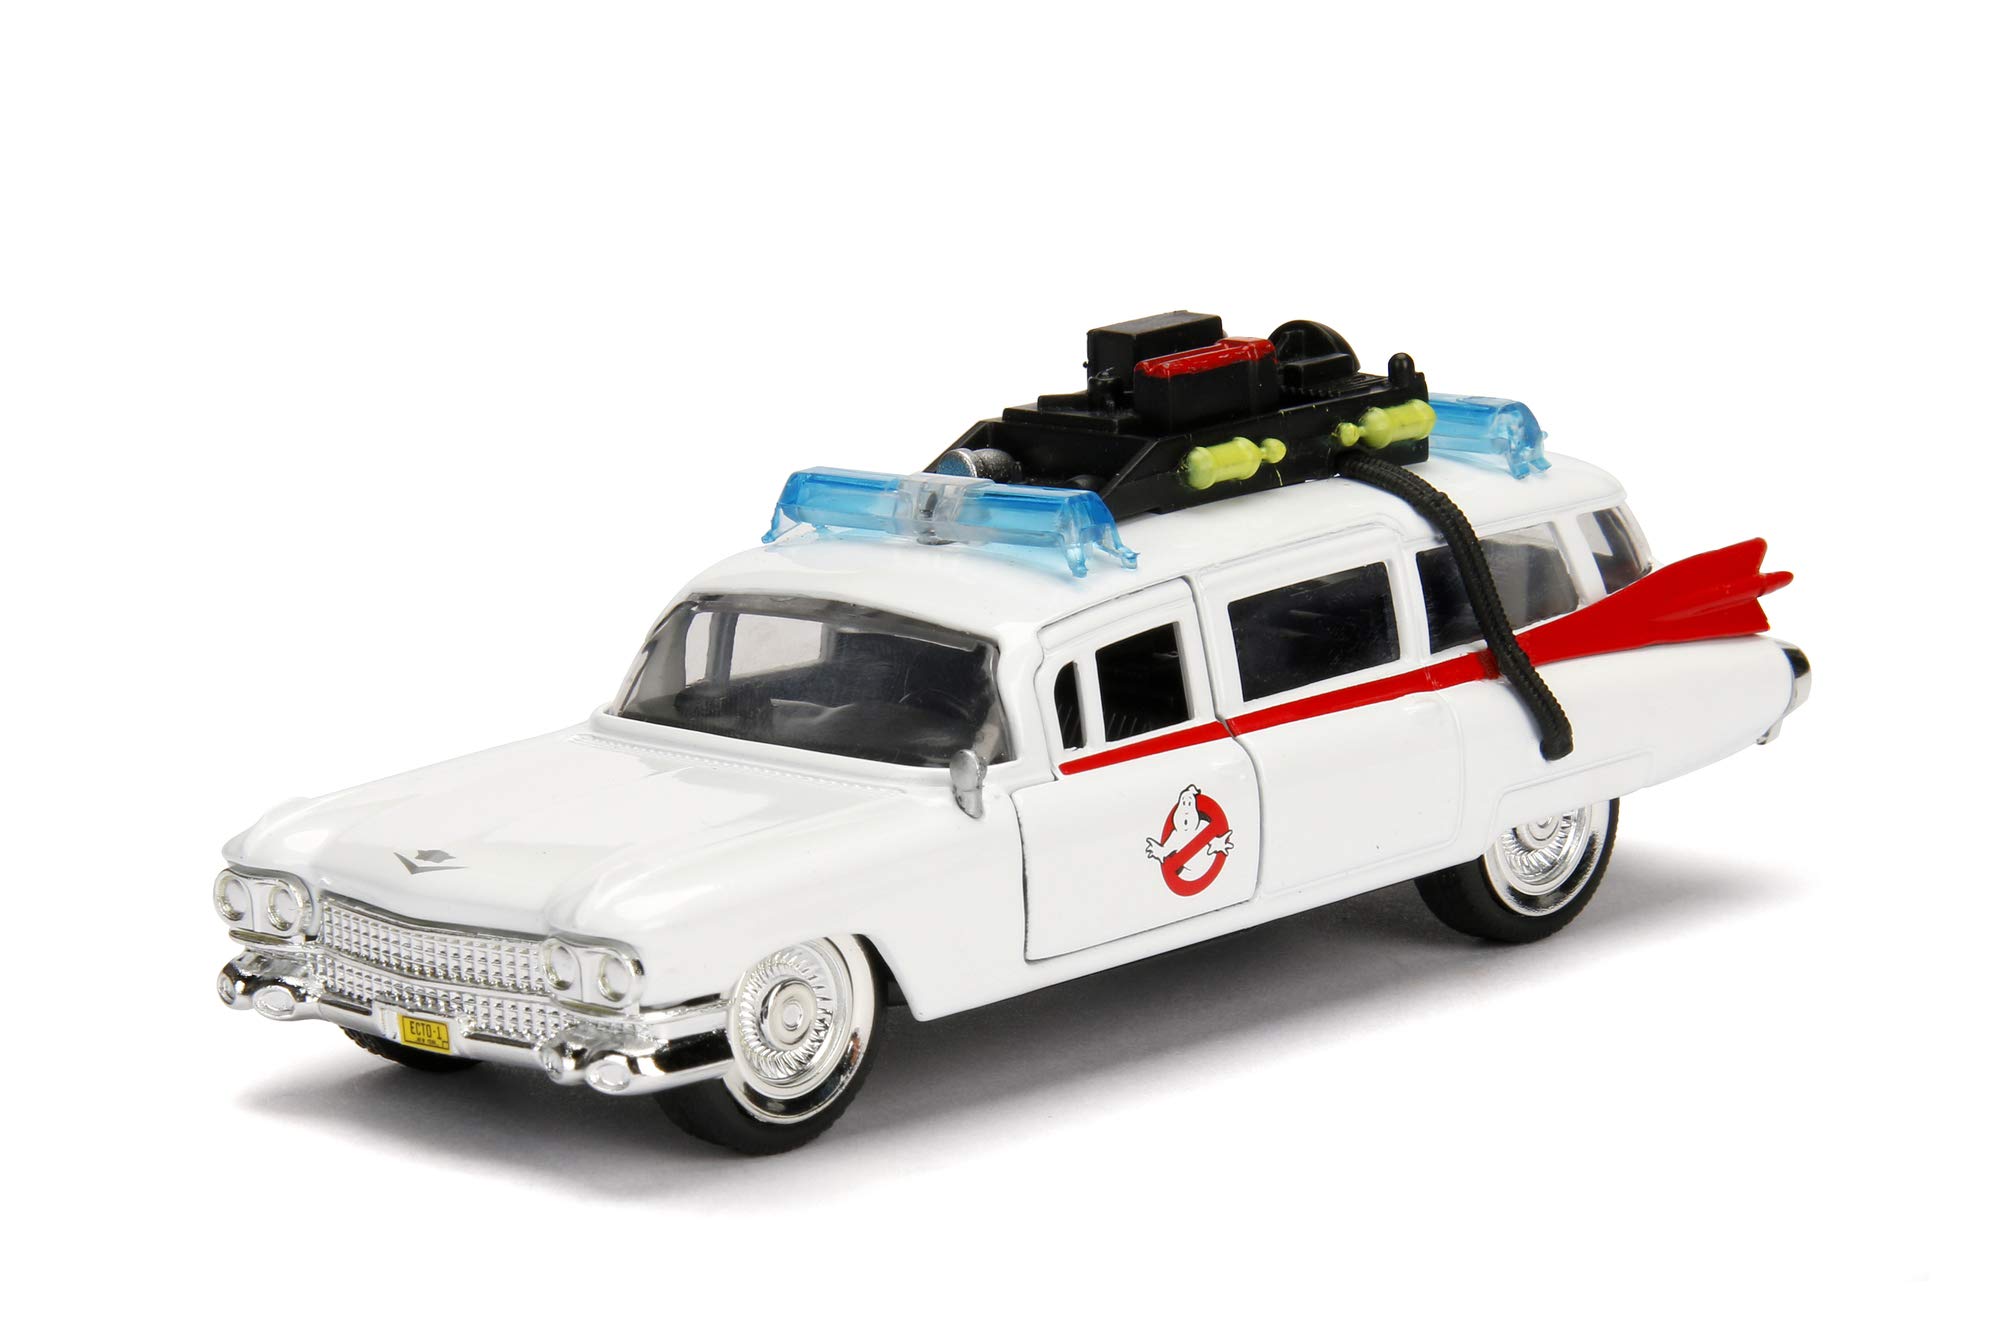 Veicolo die cast 1:32 ecto1 ghostbuster